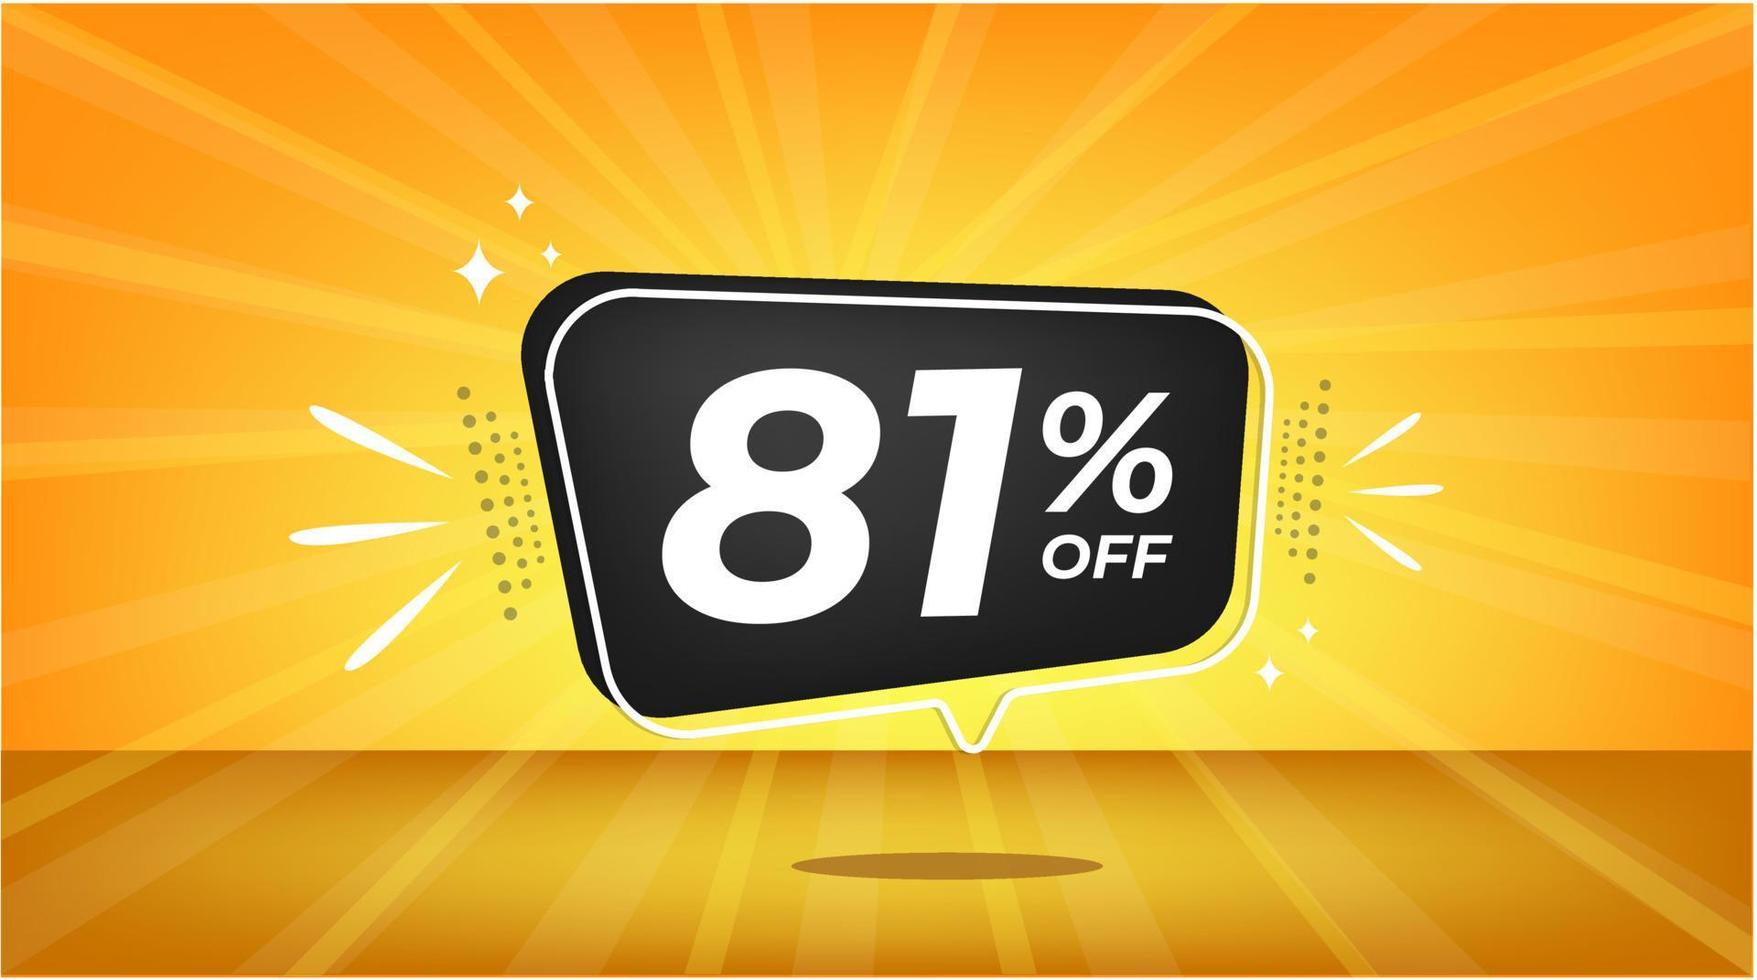 81 percent off. Yellow banner with eighty-one percent discount on a black balloon for mega big sales. vector